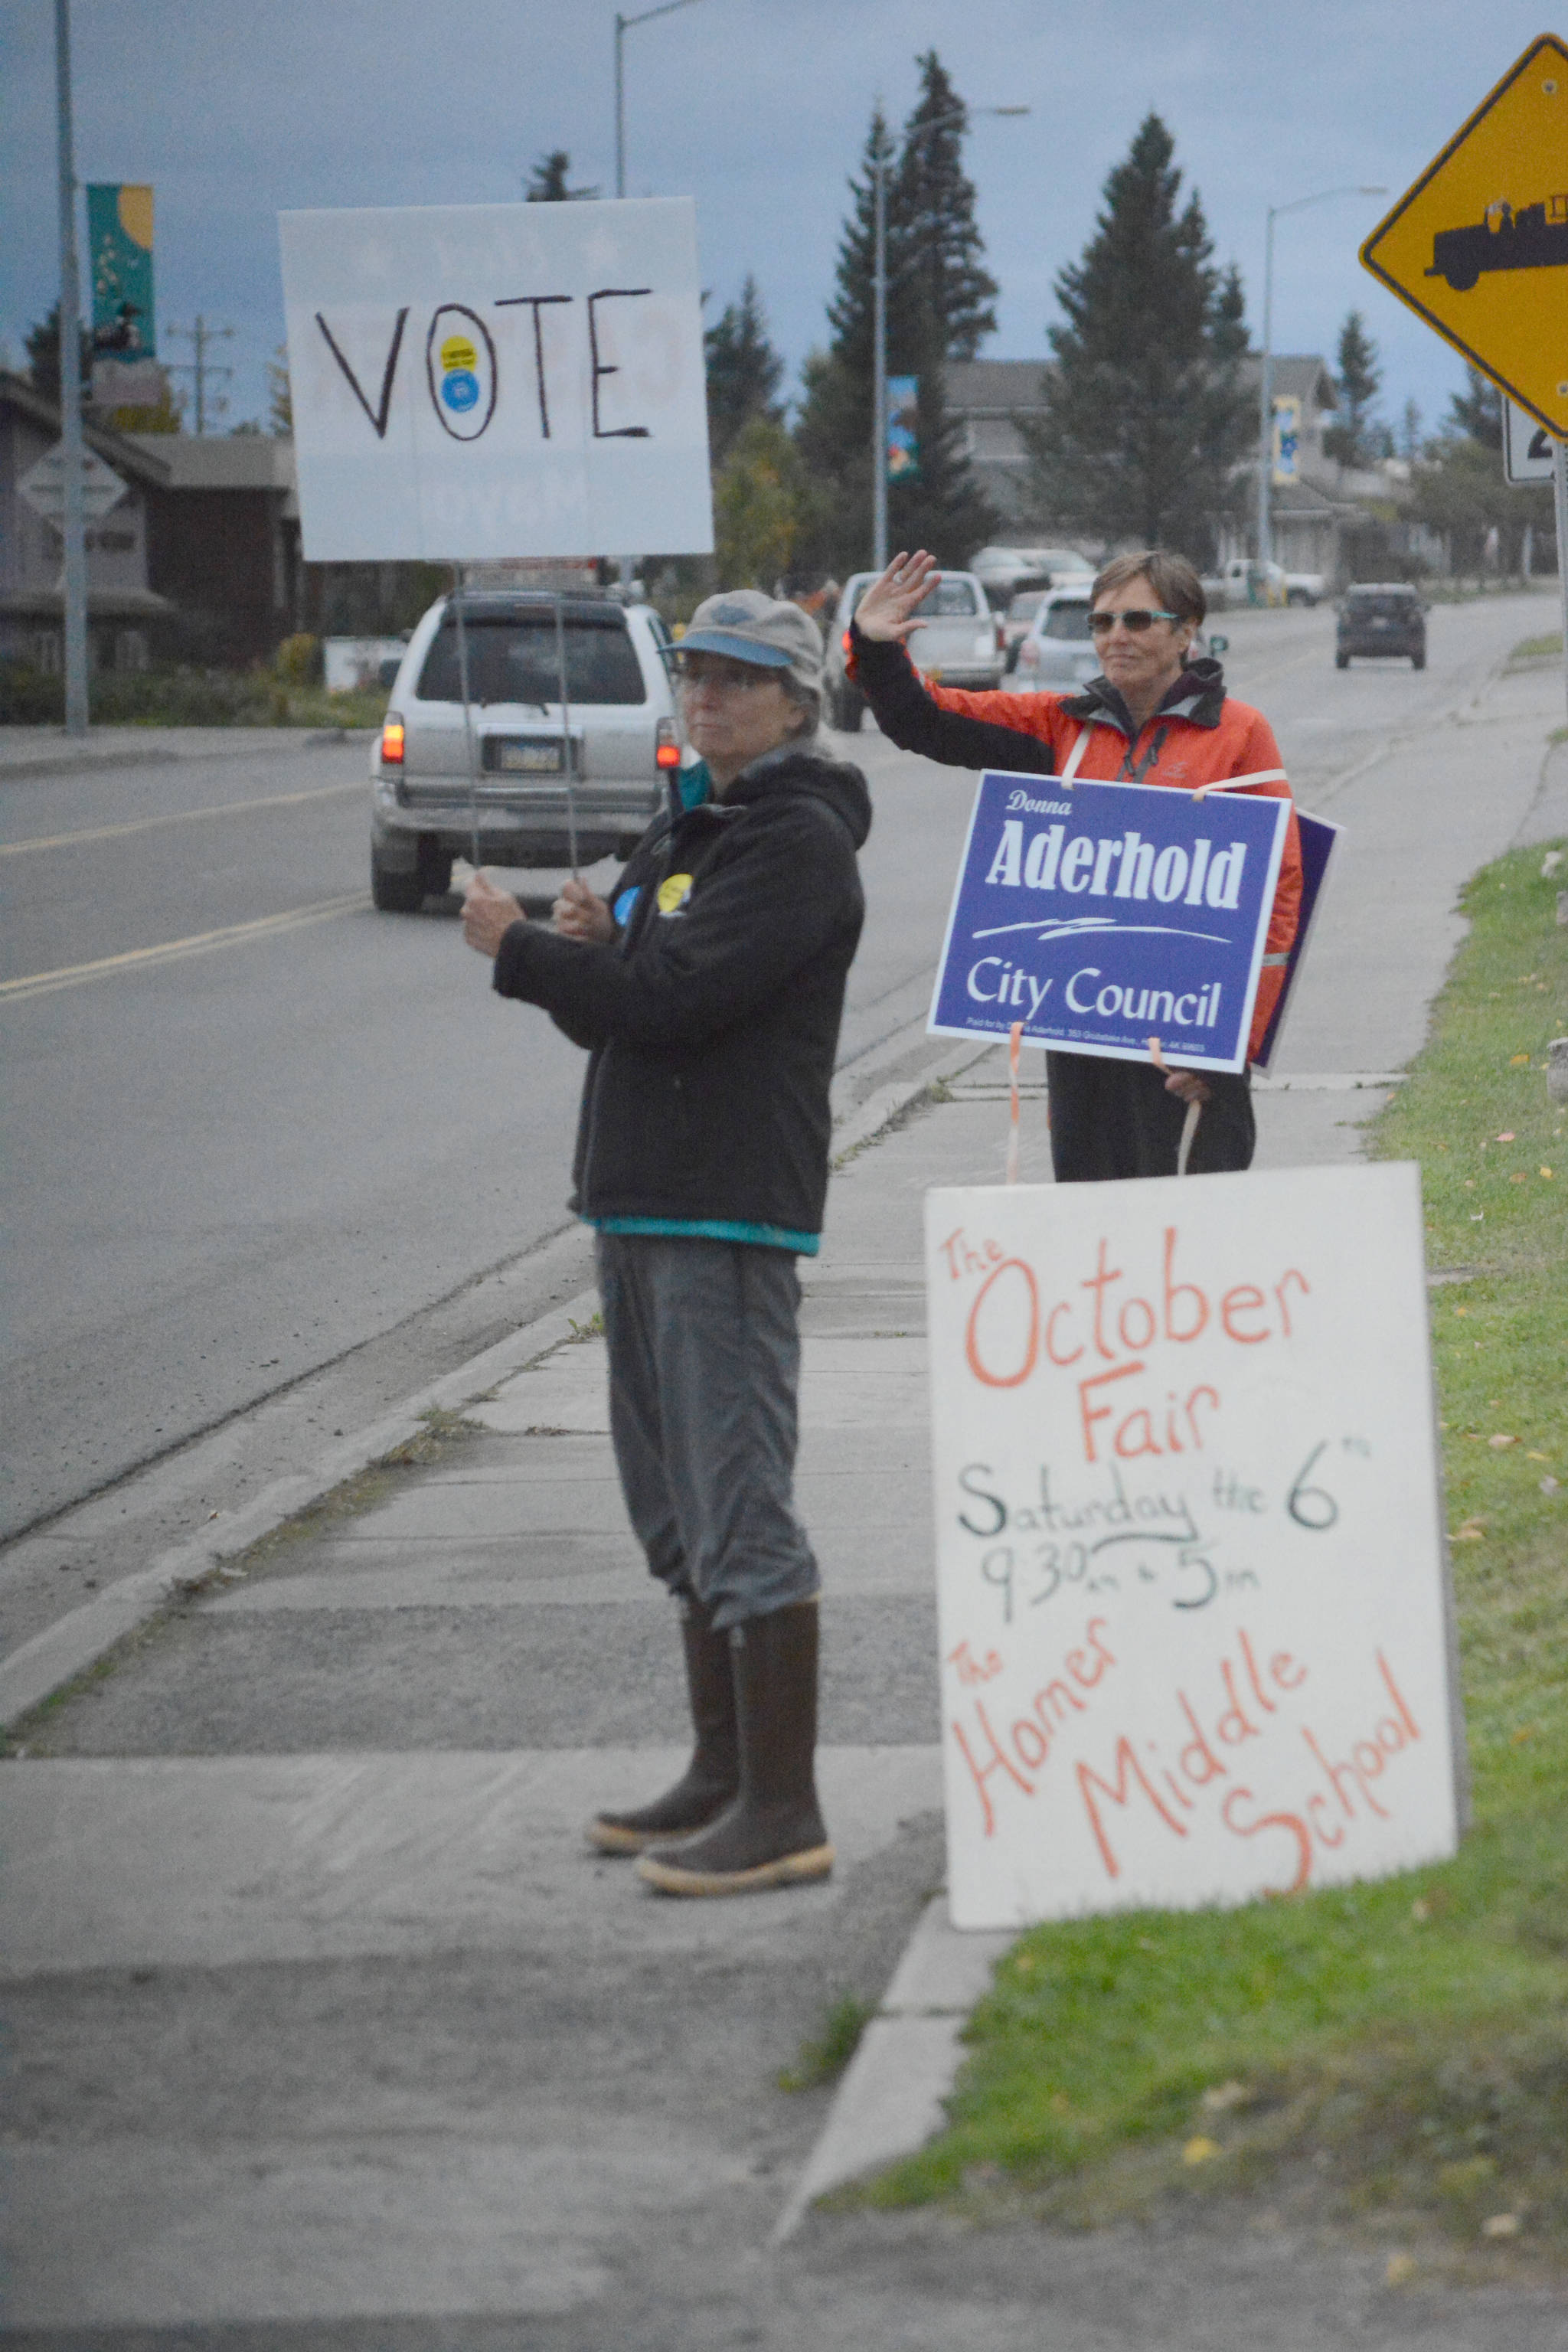 Nancy Lord, left, and Donna Aderhold, right, wave signs on Pioneer Avenue on election day, Tuesday, Oct. 2, 2018, in Homer, Alaska. Lord campaigned for her husband, Ken Castner, the apparent winner in the city of Homer mayoral race. Aderhold was the top vote-getter for the race for two Homer City Council seats. (Photo by Michael Armstrong/Homer News)